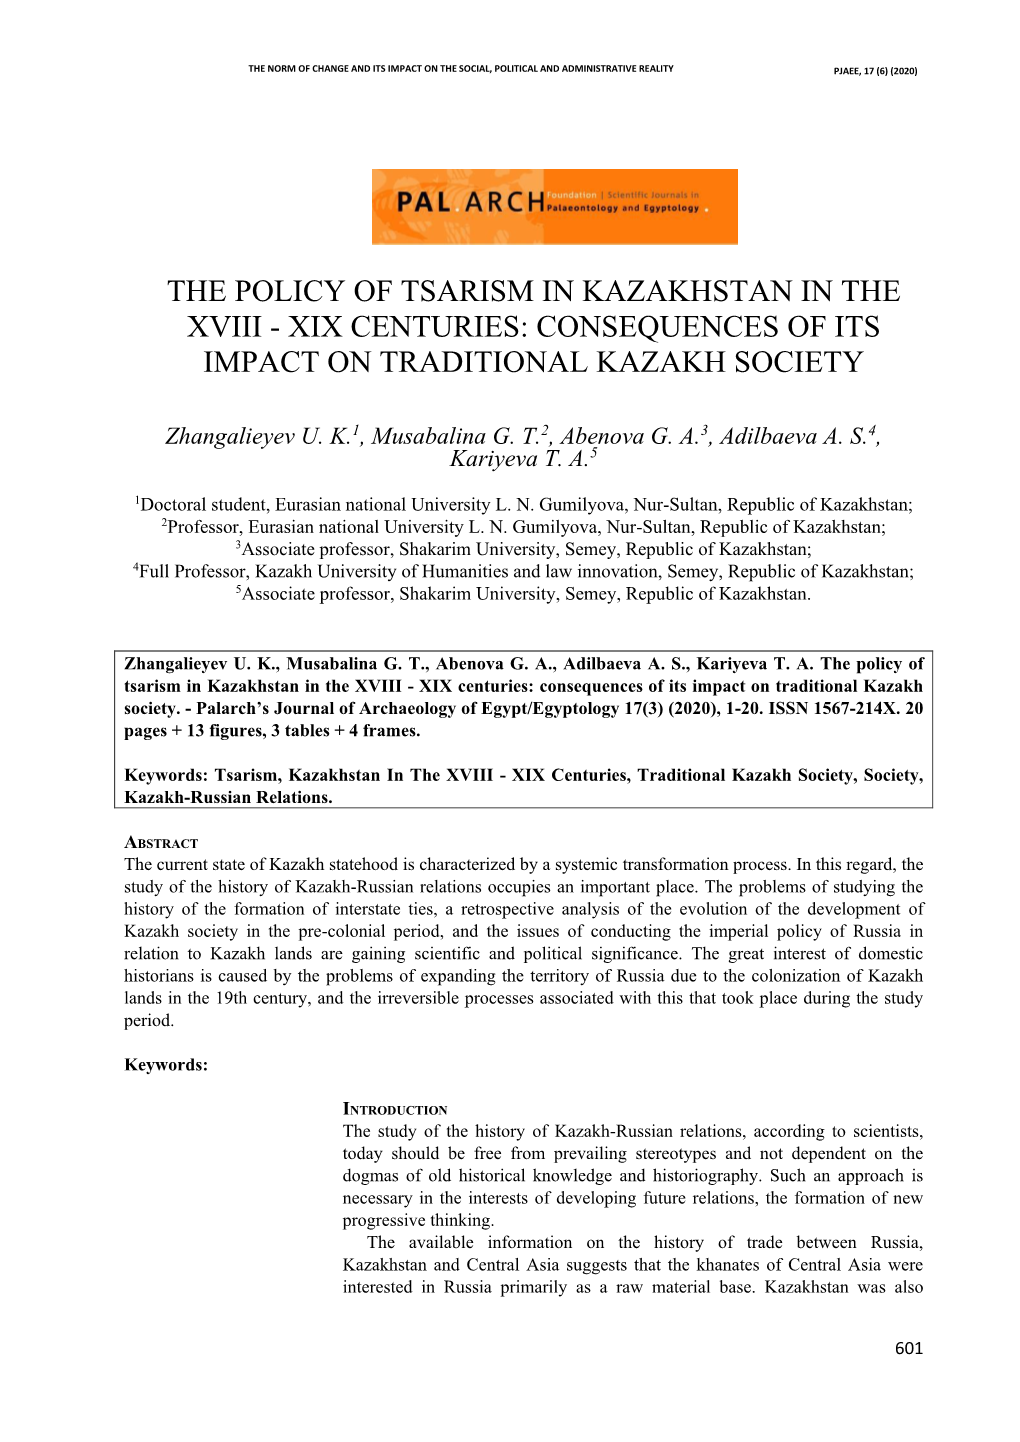 The Policy of Tsarism in Kazakhstan in the Xviii - Xix Centuries: Consequences of Its Impact on Traditional Kazakh Society